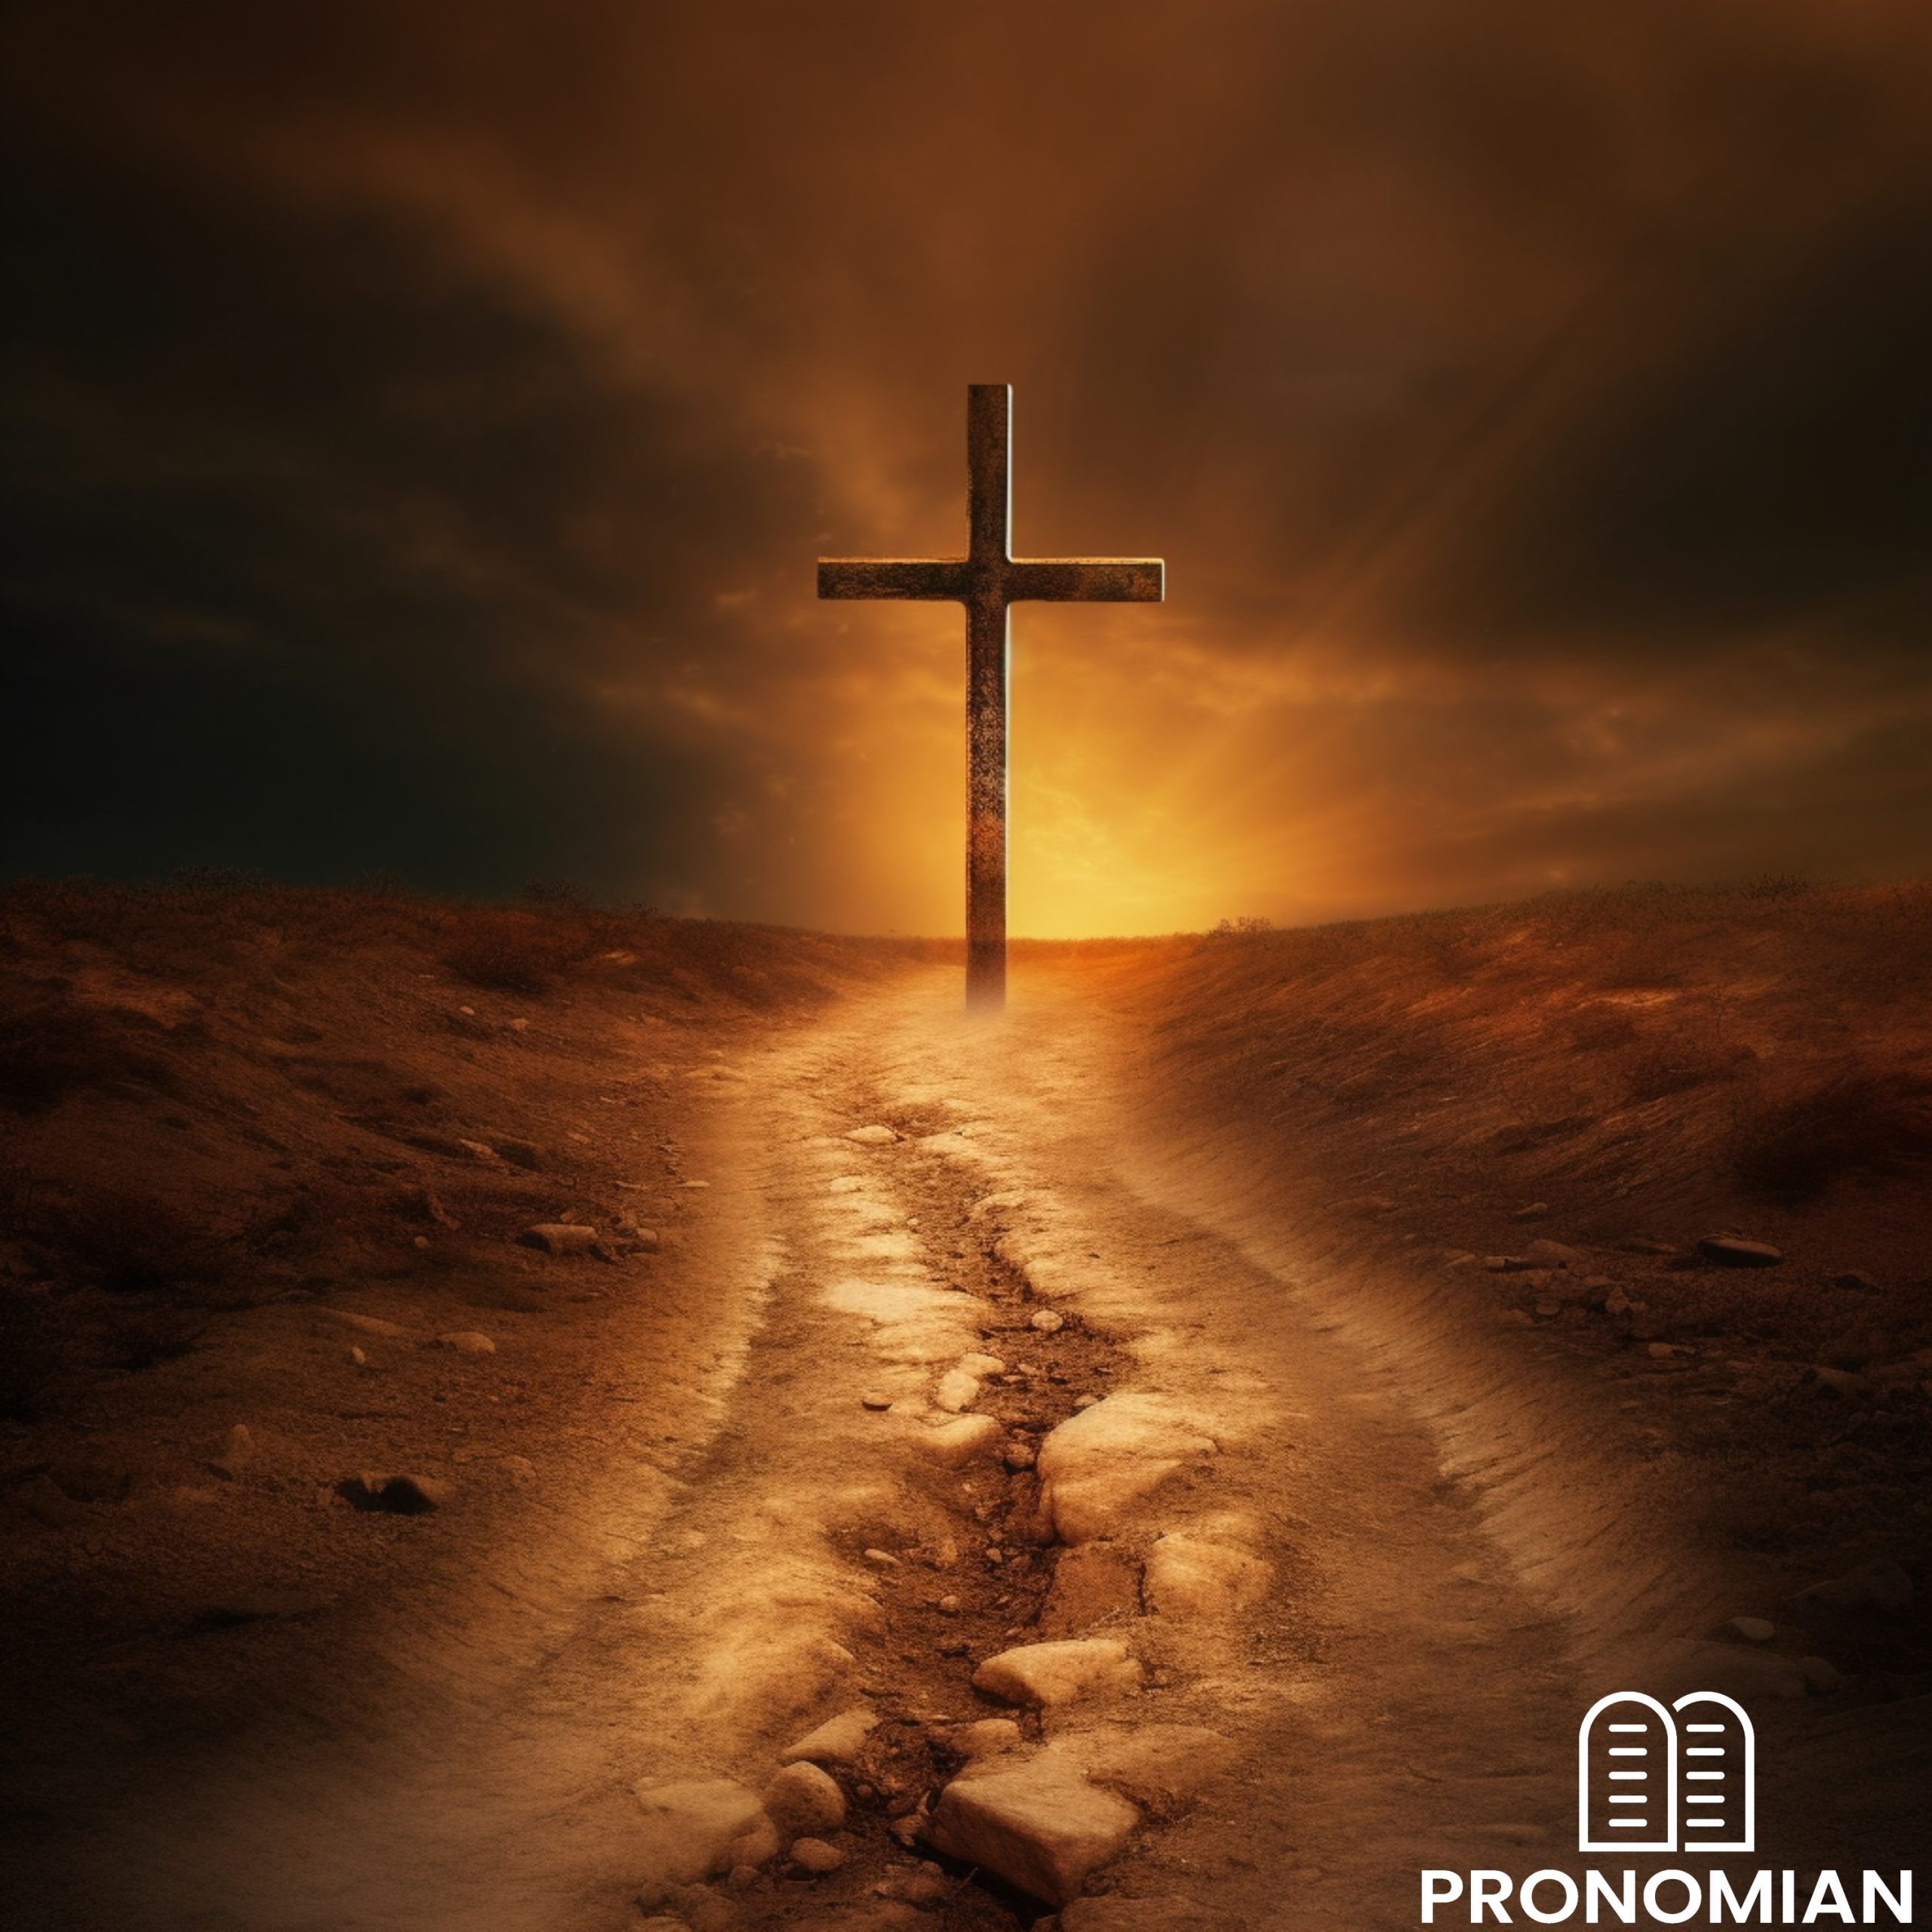 A well-trodden dirt path leads straight towards a glowing, golden cross standing tall at the end of the road. The cross is bathed in a warm, bright light against a slightly dimmed background, symbolizing the hope and truth of salvation exclusively through Jesus Christ. sharp focus, no contrast, cinematic photography